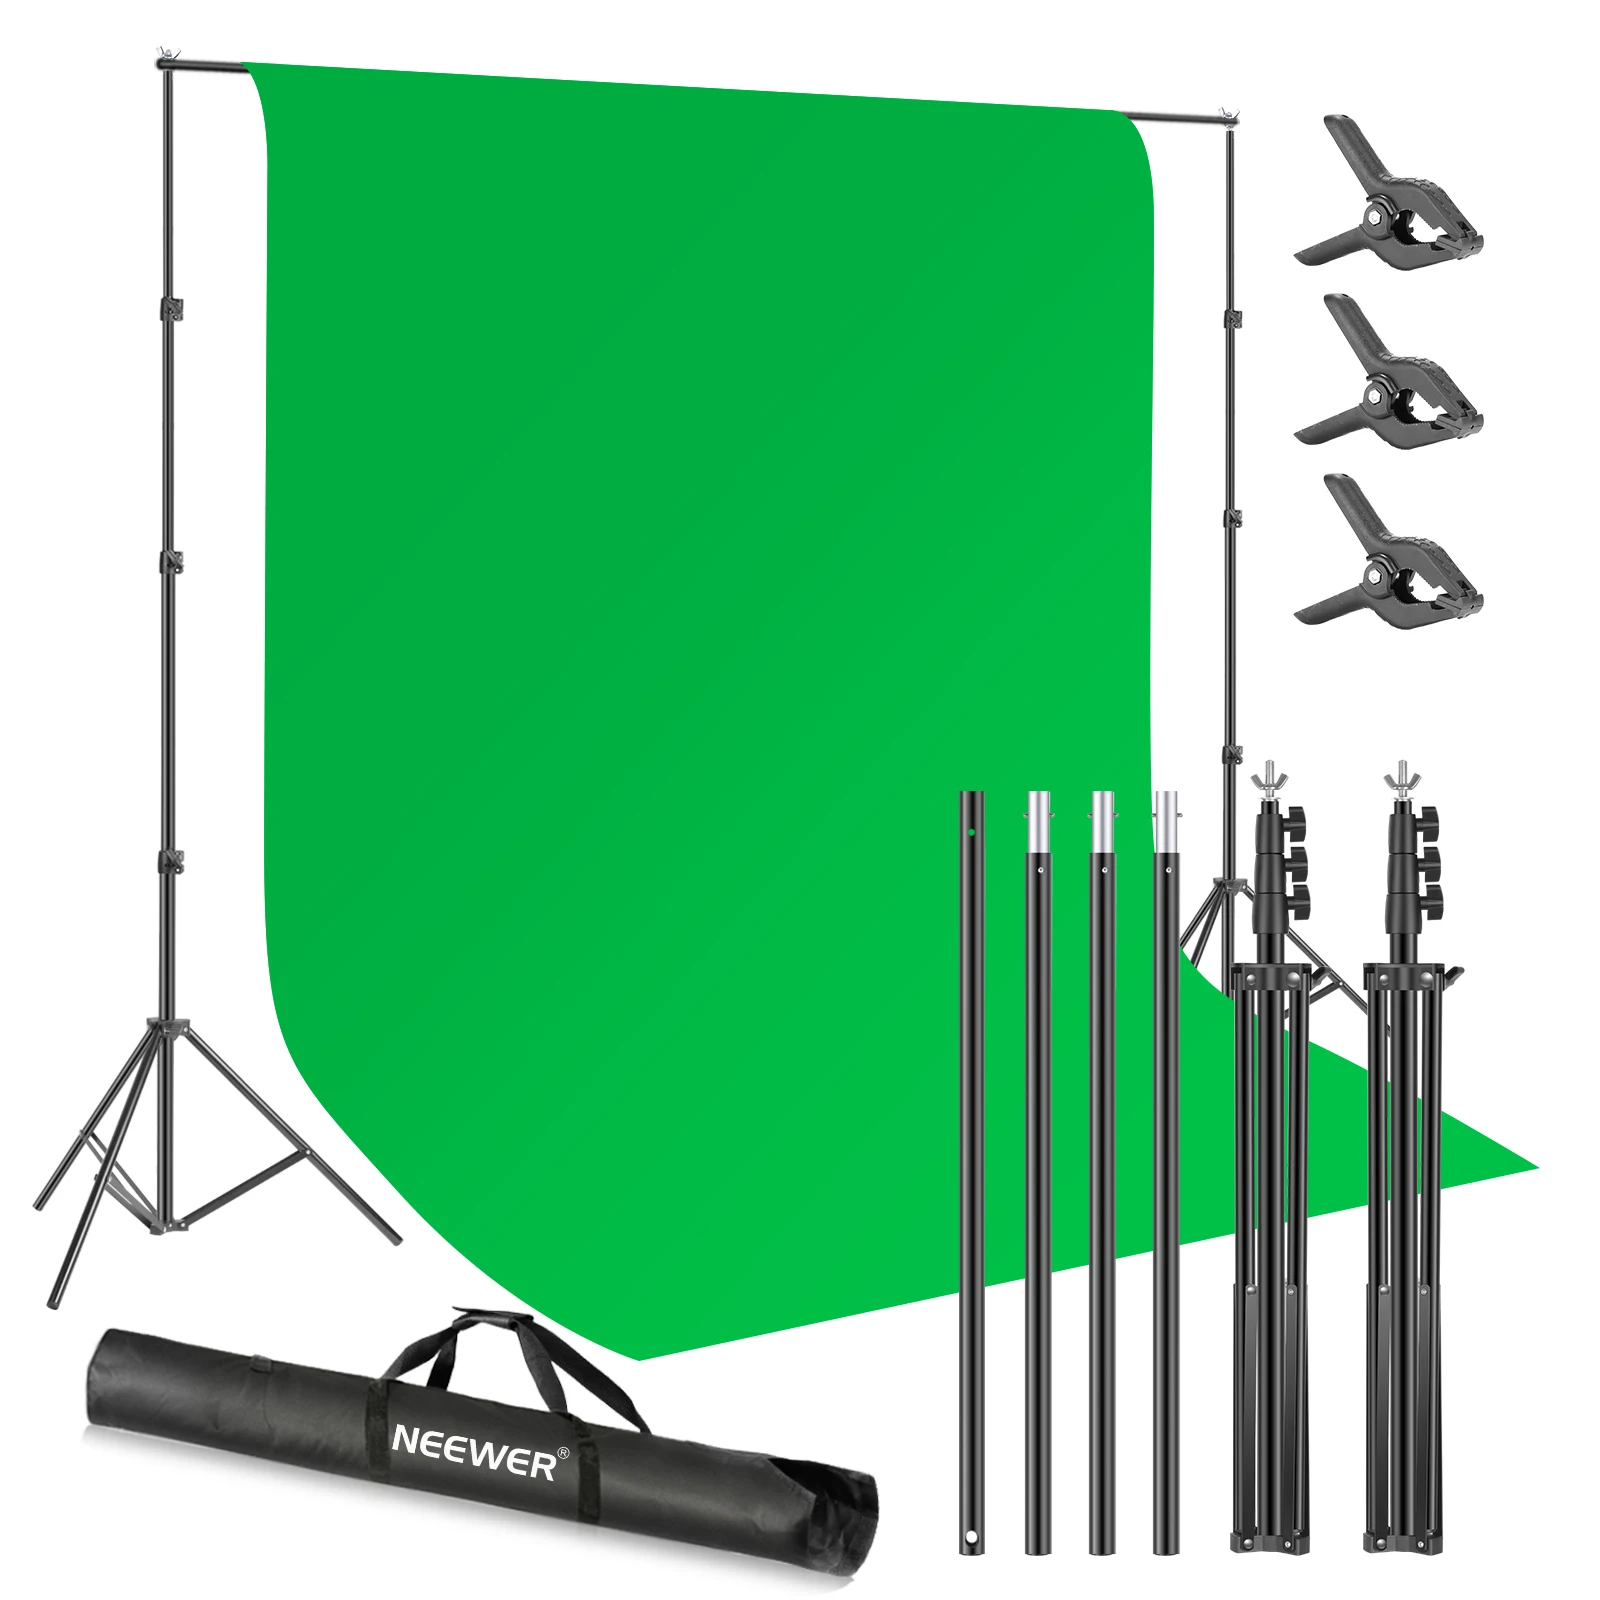 3 Clamps & Sandbag 5x6.5ft Chromakey Collapsible Photography Background Support System for Photo Video Studio YICOE T-Shape Backdrop Stand Kit with Green Screen Upgraded Clamps & SANDBAG Version 